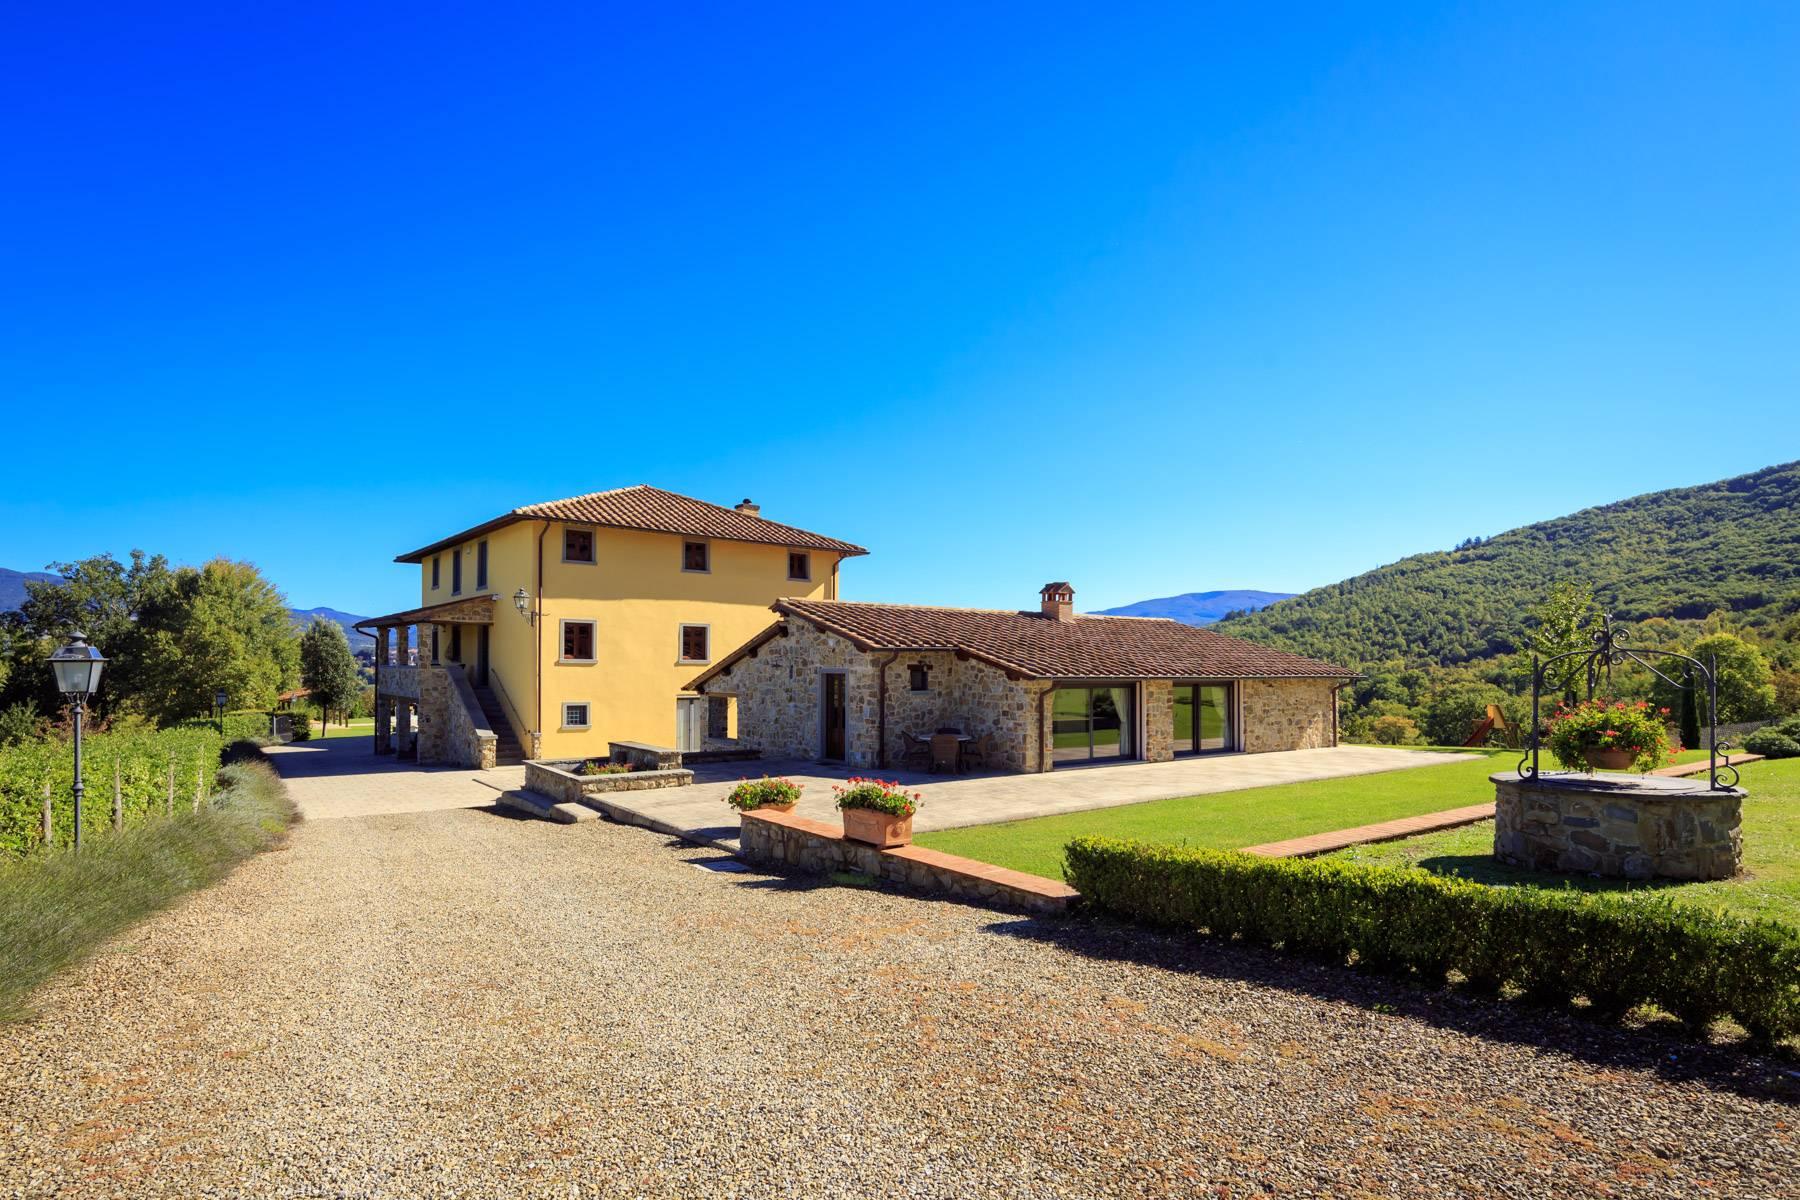 Marvelous estate with views over the Casentino valley - 2